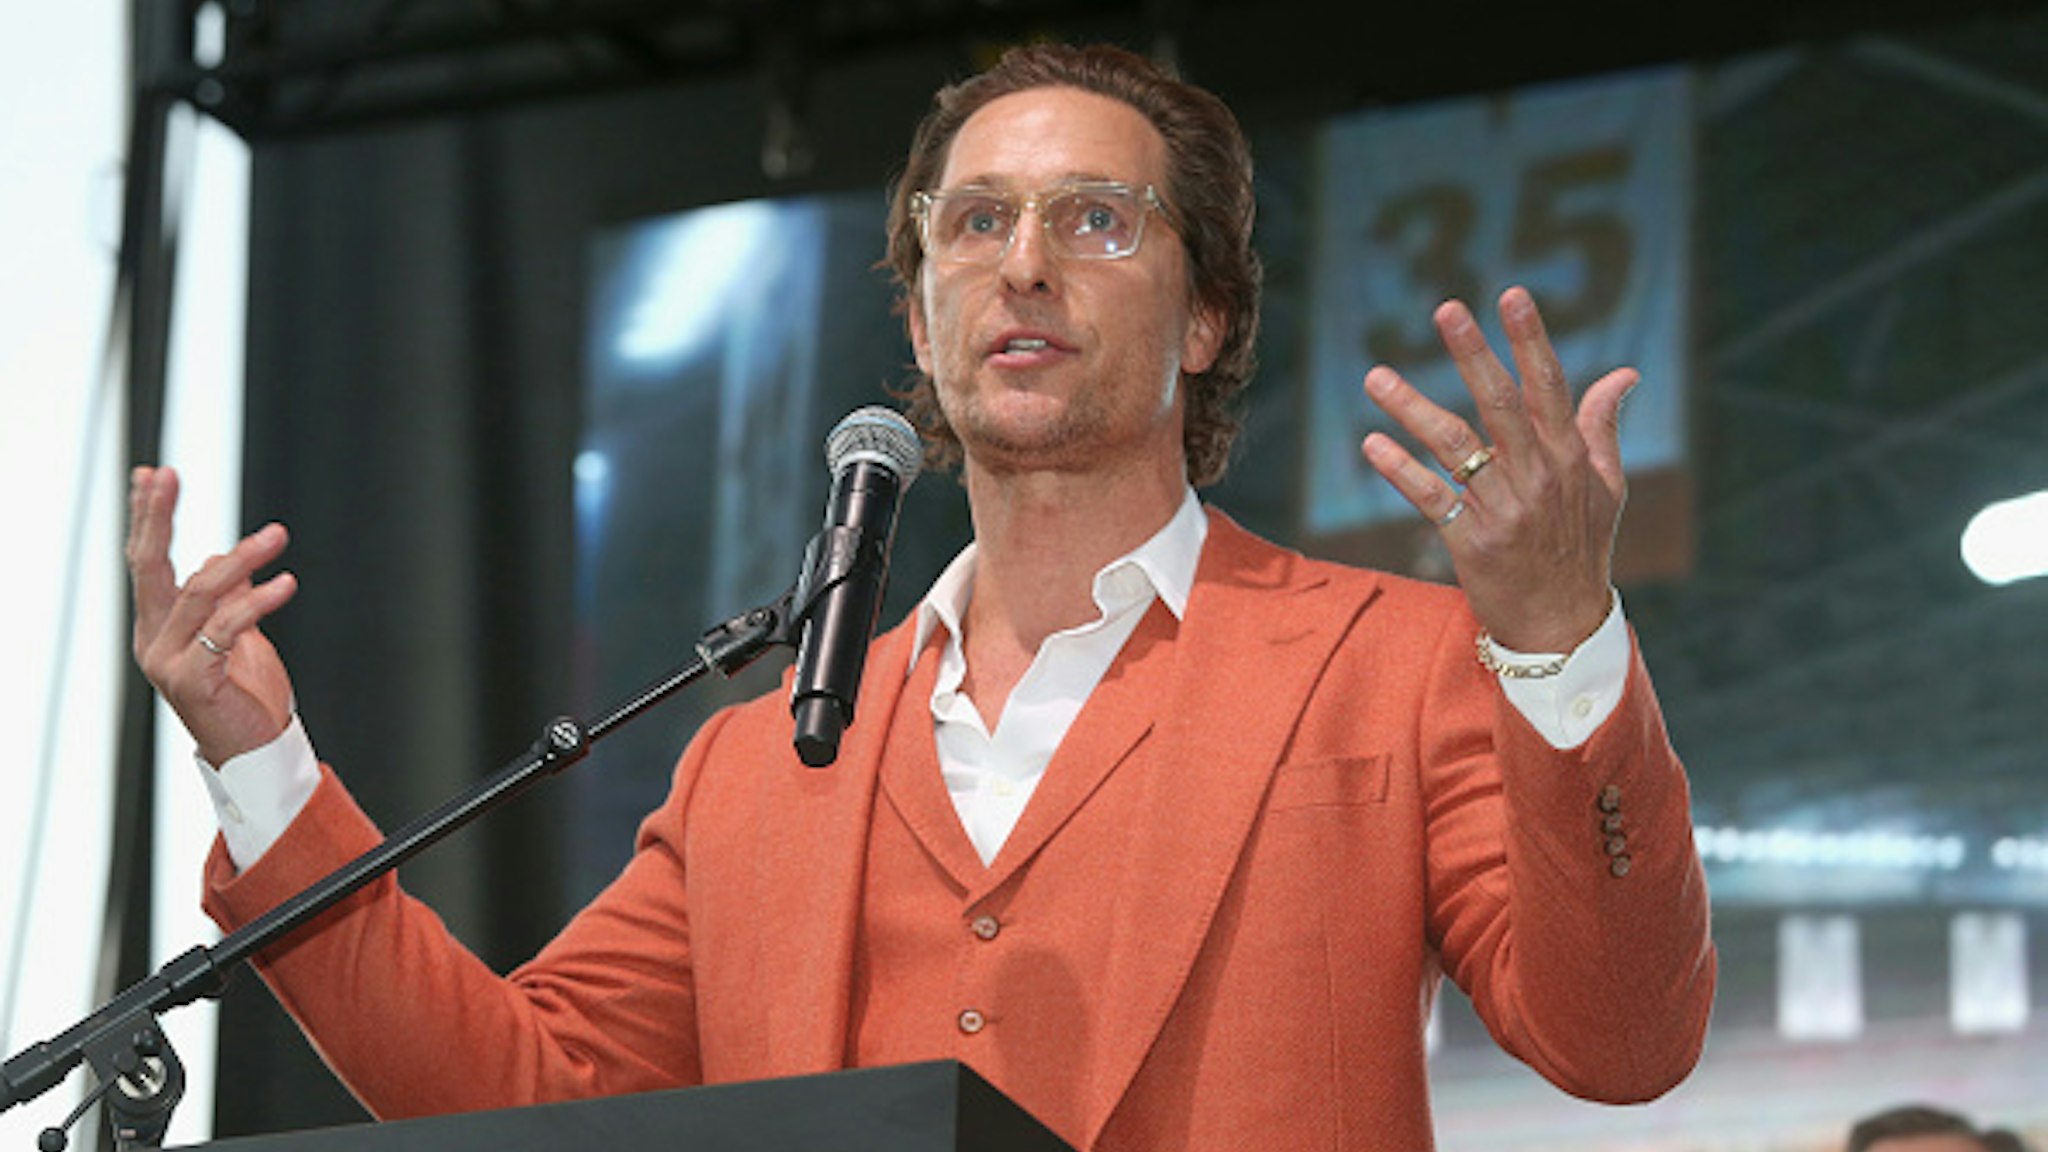 AUSTIN, TEXAS - DECEMBER 03: University of Texas Minister of Culture Matthew McConaughey attends the groundbreaking ceremony for the new University of Texas event facility, the "Moody Center" on December 3, 2019 in Austin, Texas.